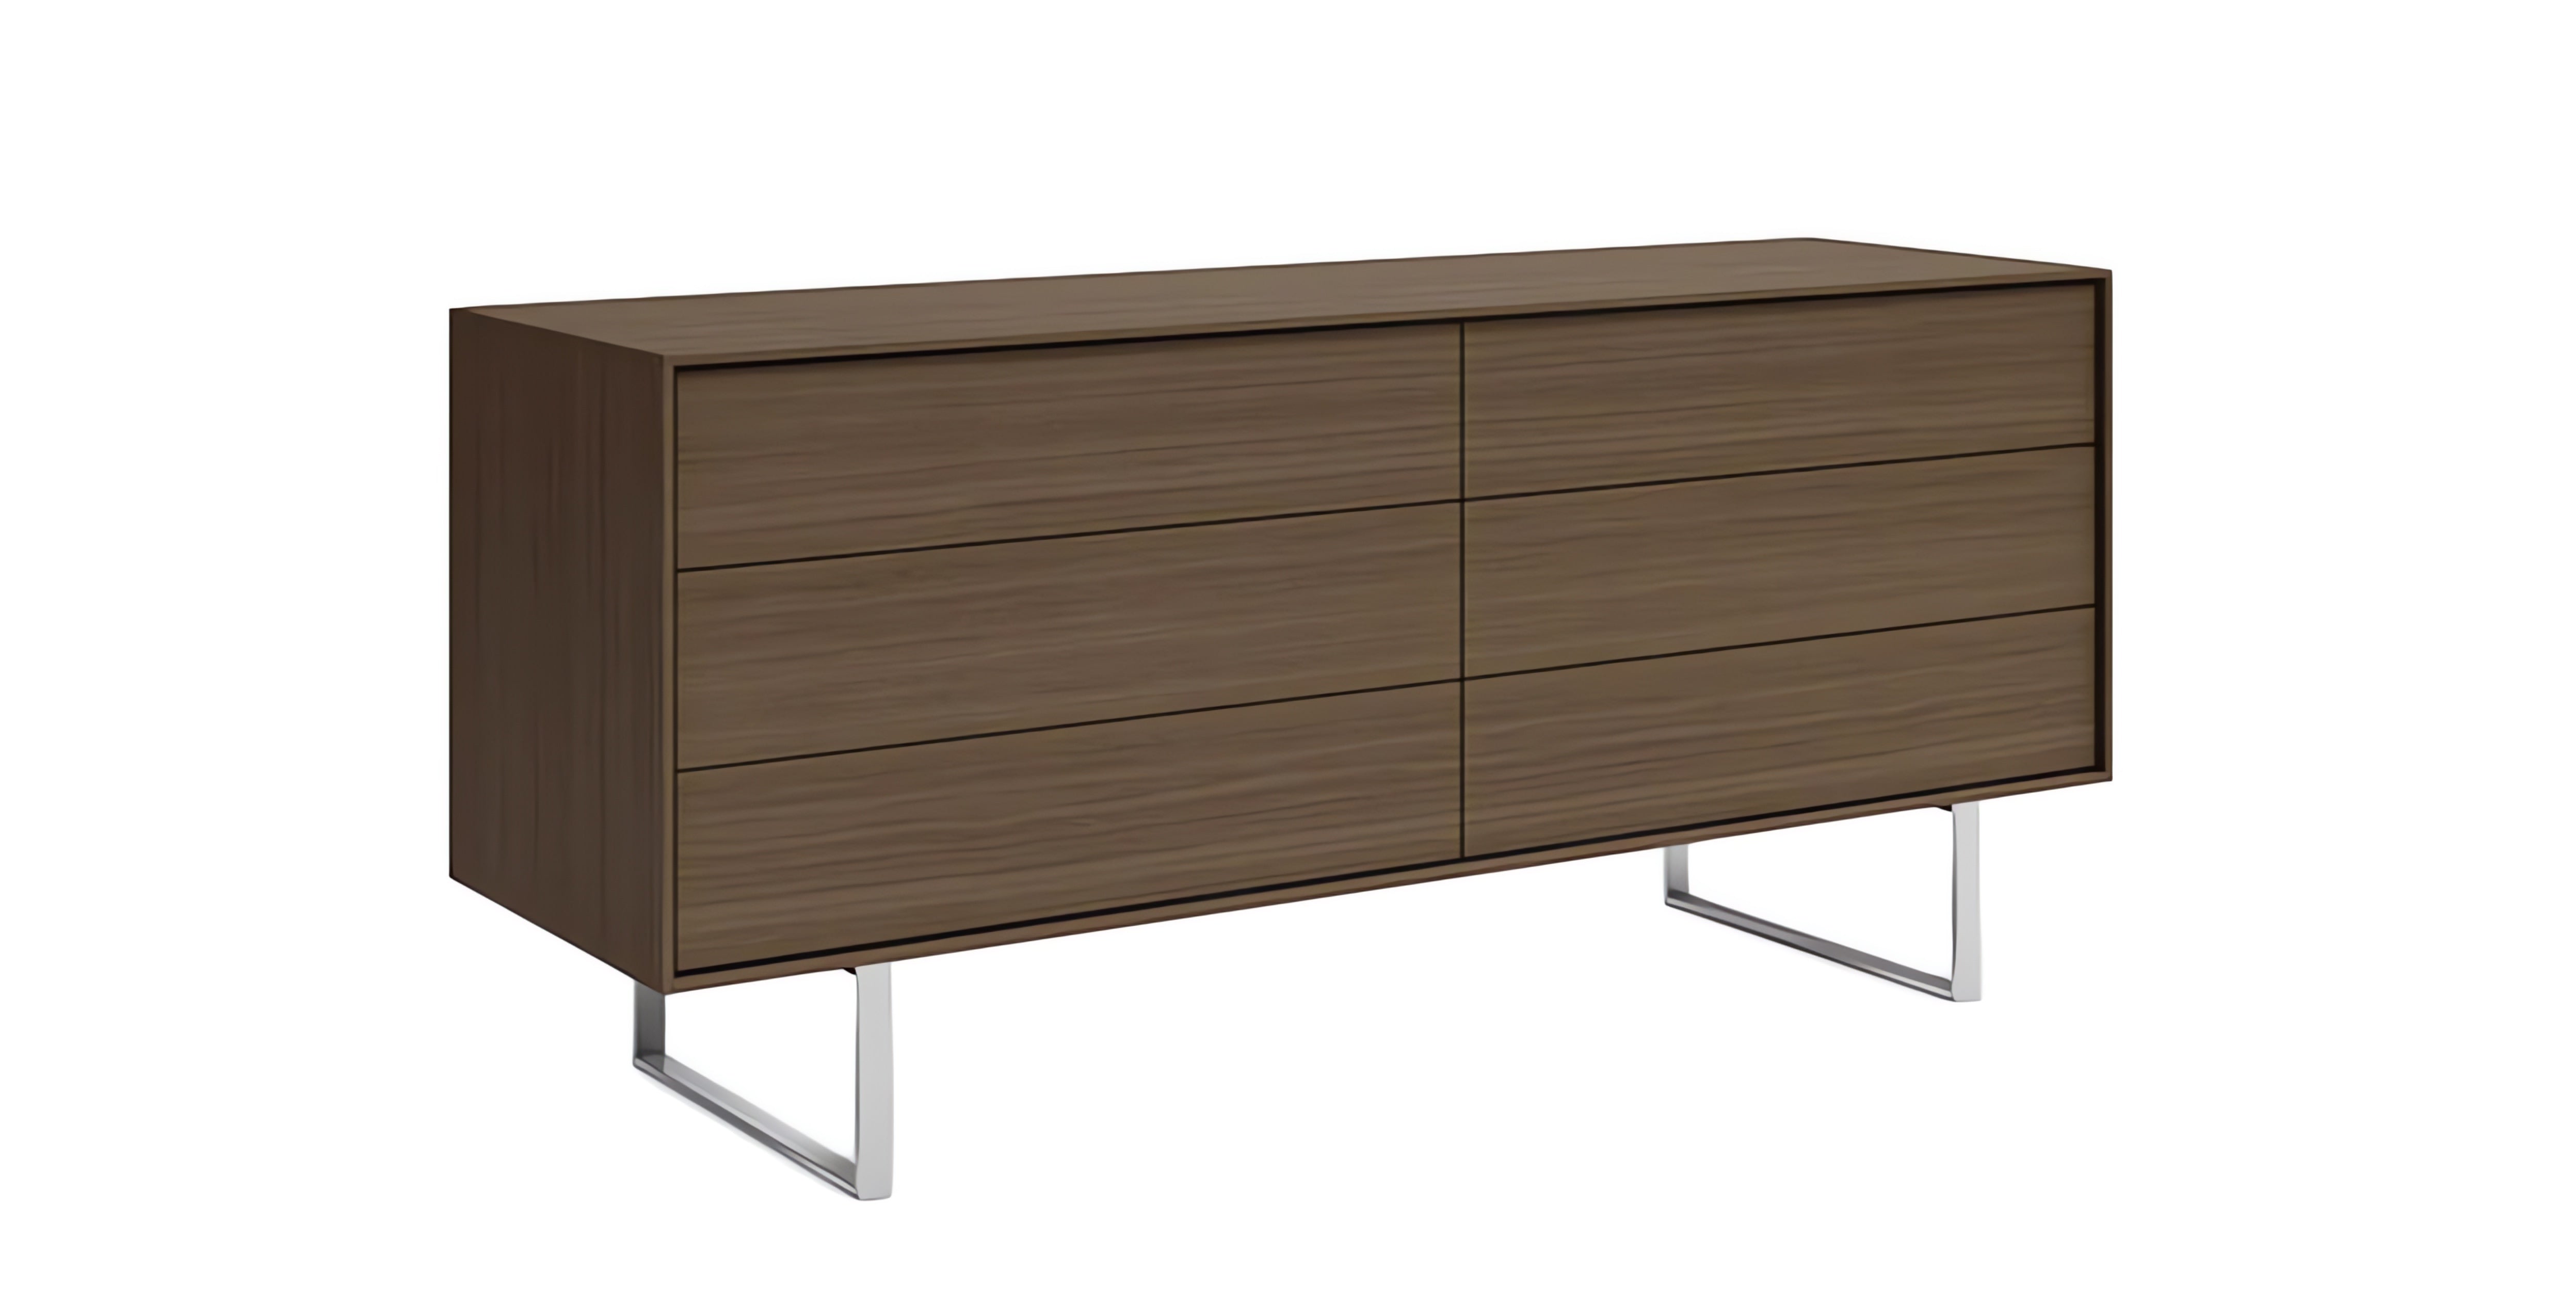 Praline on Walnut with Brushed Nickel Legs | Mobican Ophelia Low Double Dresser | Valley Ridge Furniture